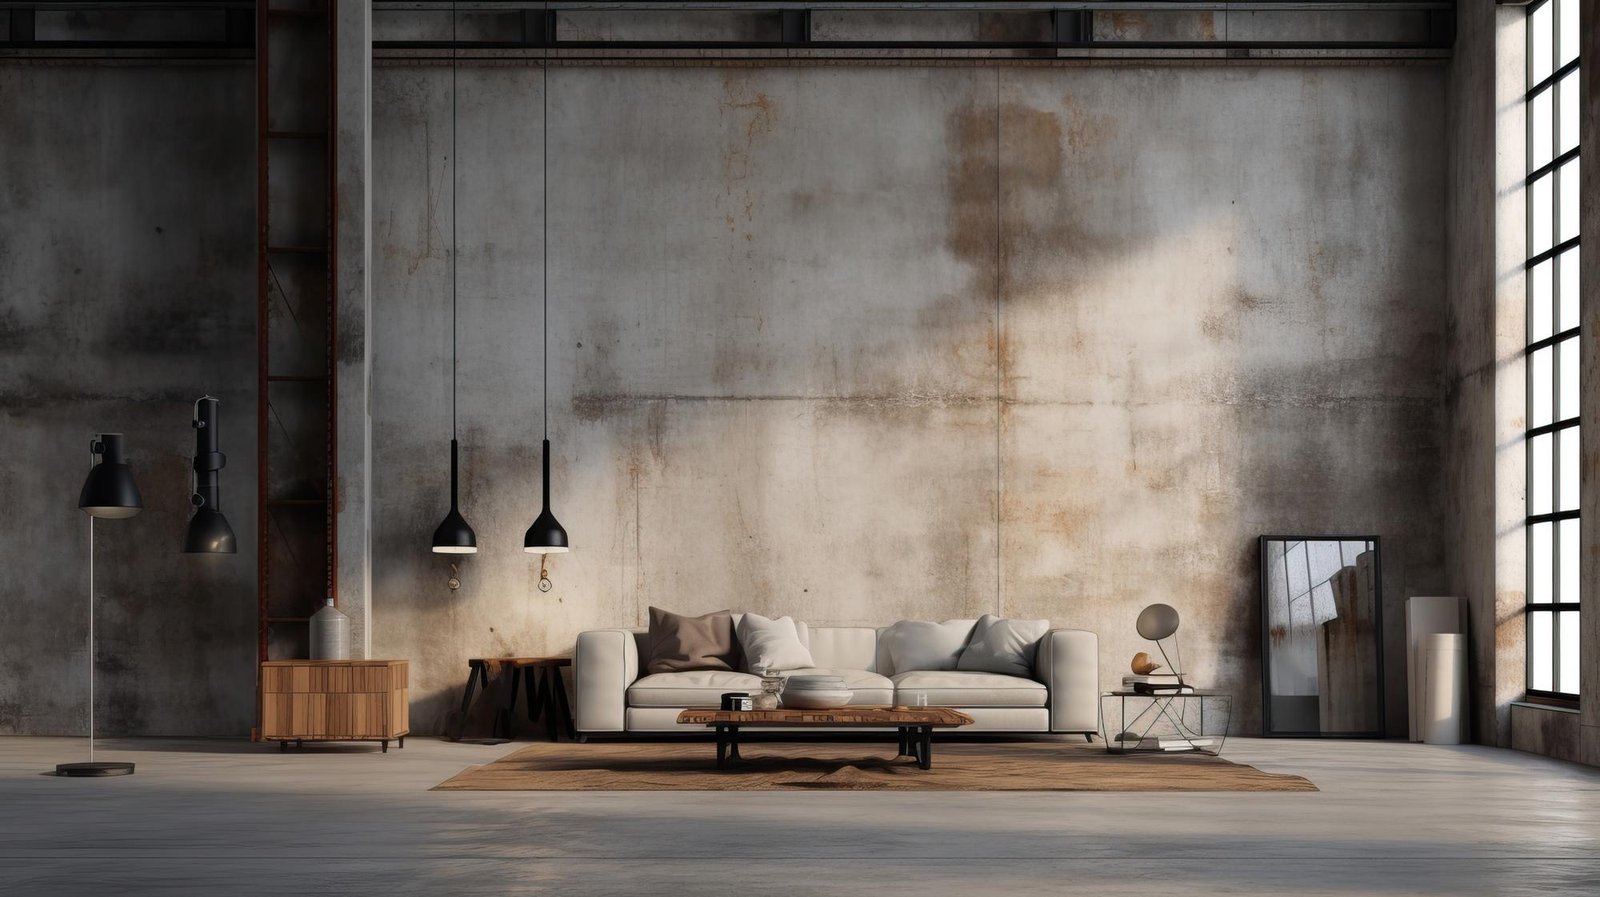 Concrete walls, grey couch, large windows and industrial lighting fixtures. 